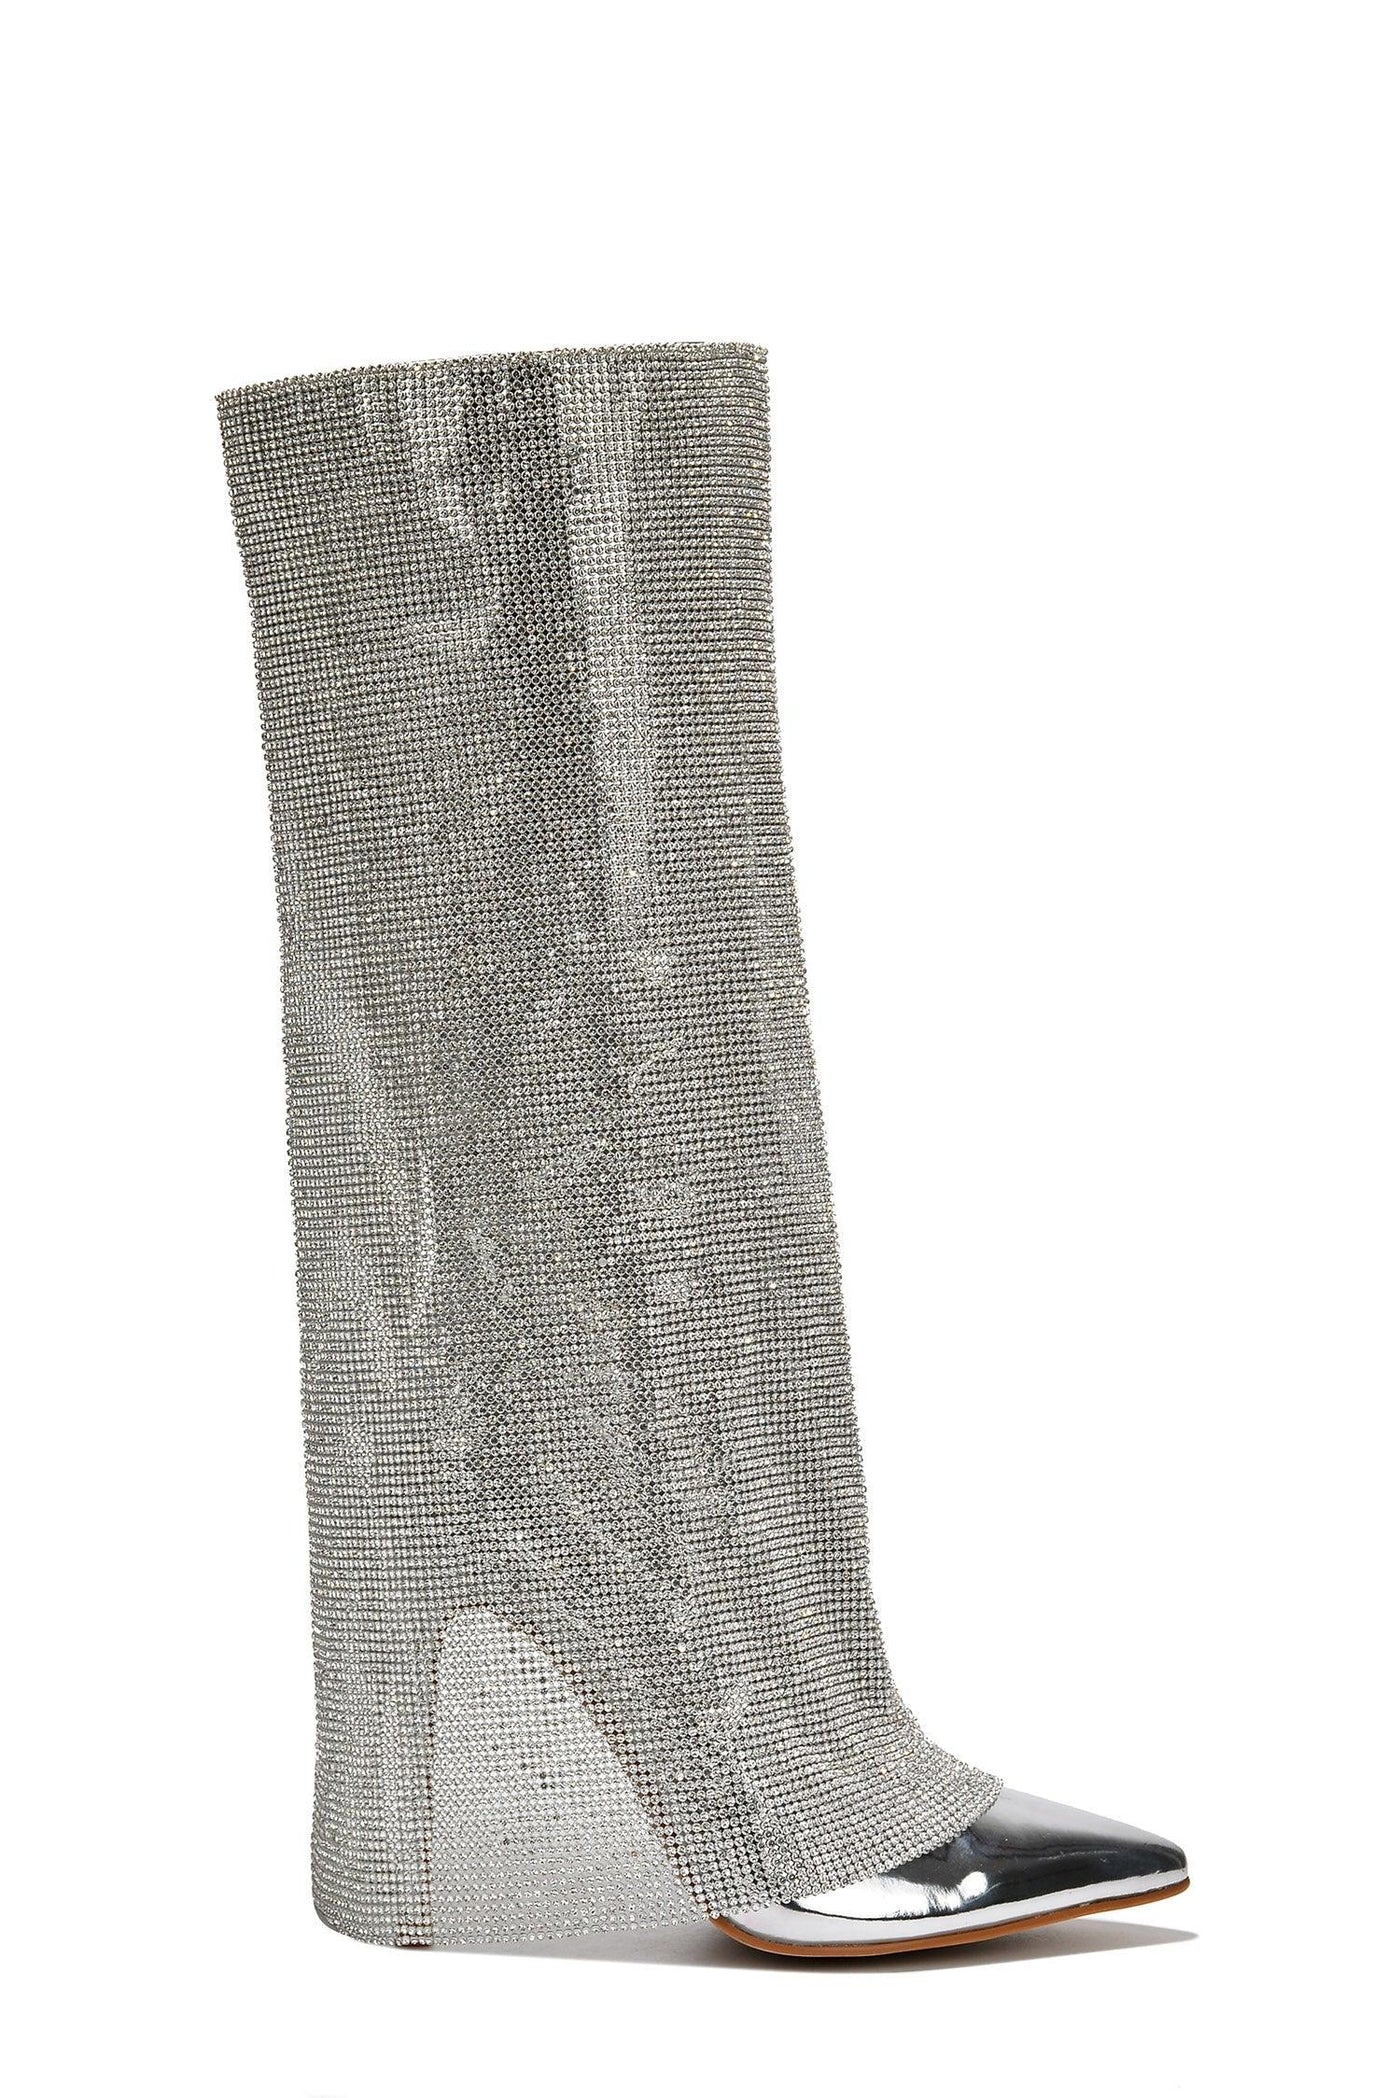 METIZER - SILVER Thigh High Boots - AMIClubwear